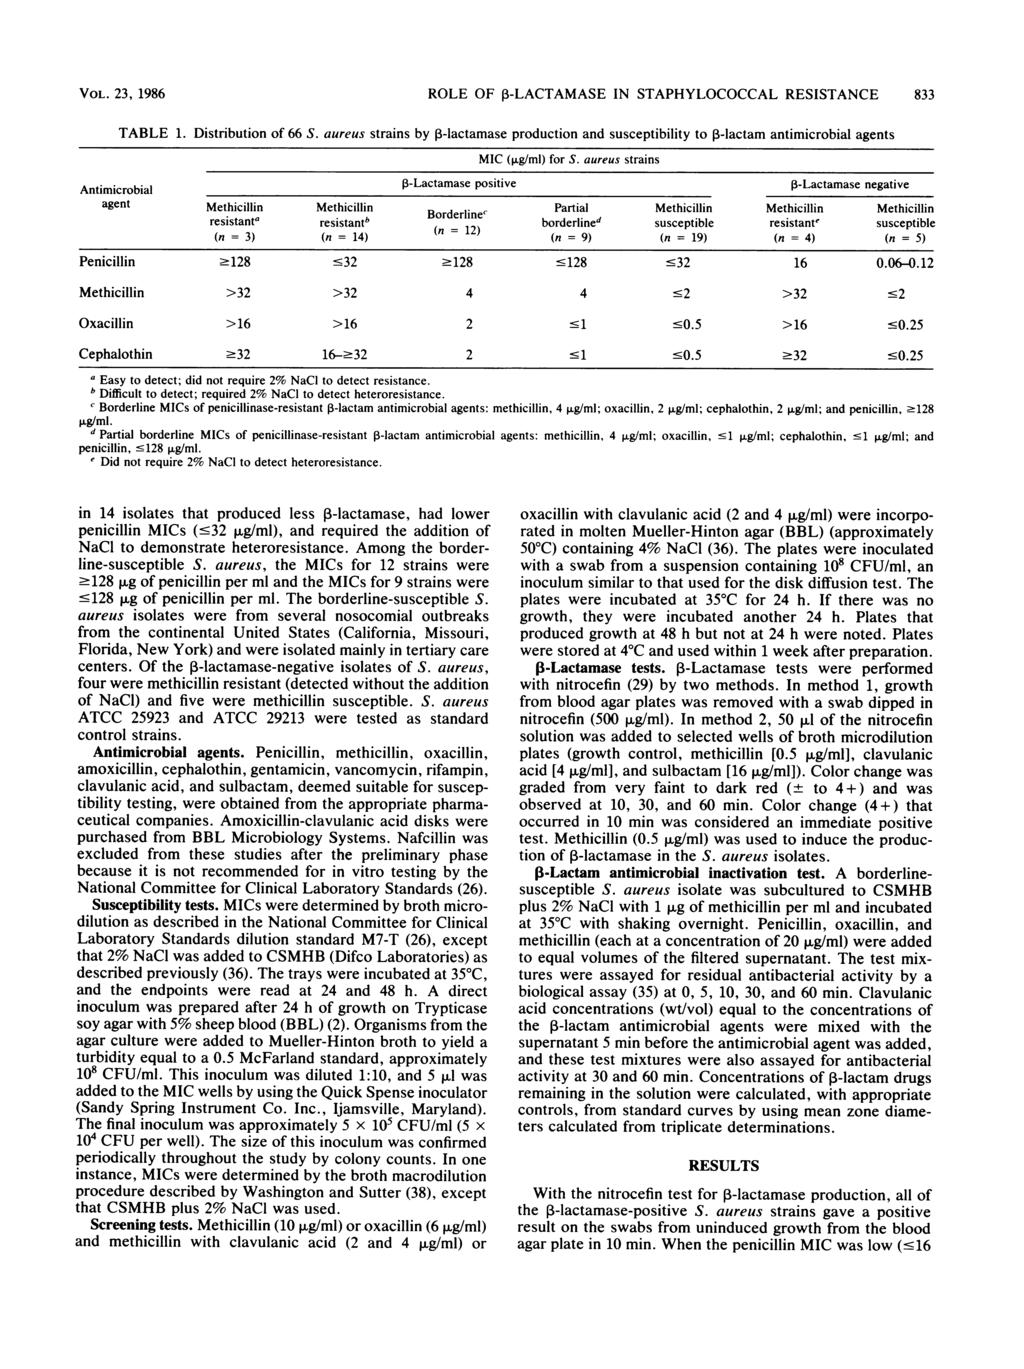 TABLE 1. ROLE OF P-LACTAMASE IN STAPHYLOCOCCAL RESISTANCE VOL. 23, 1986 833 Distribution of 66 S.